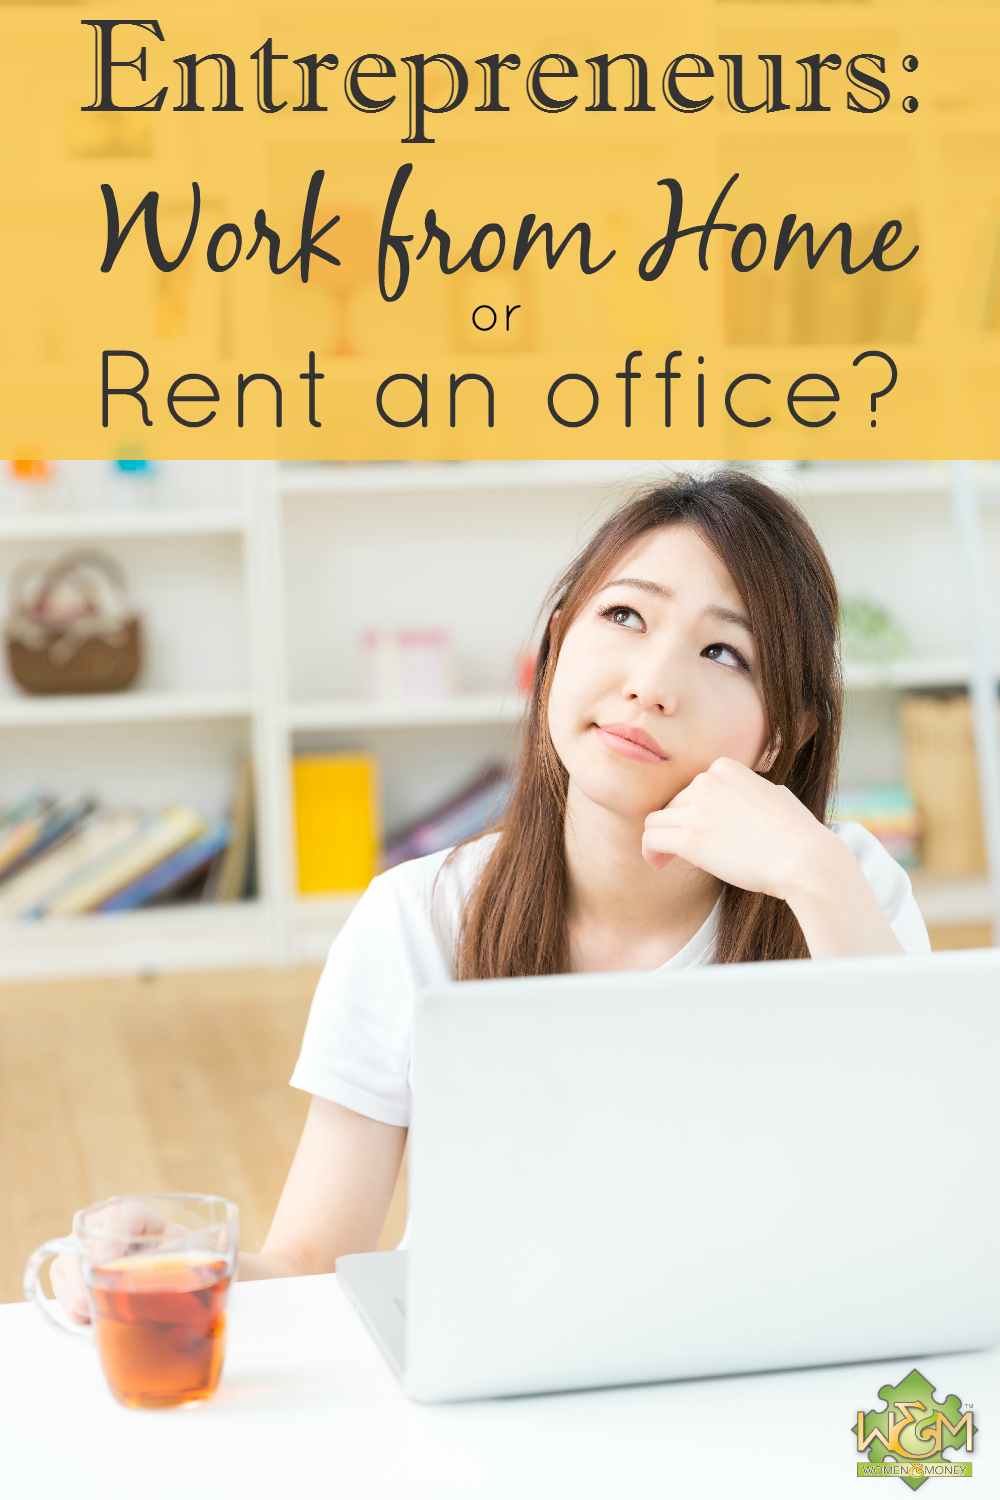 Entrepreneurs - should you work from home or rent an office?